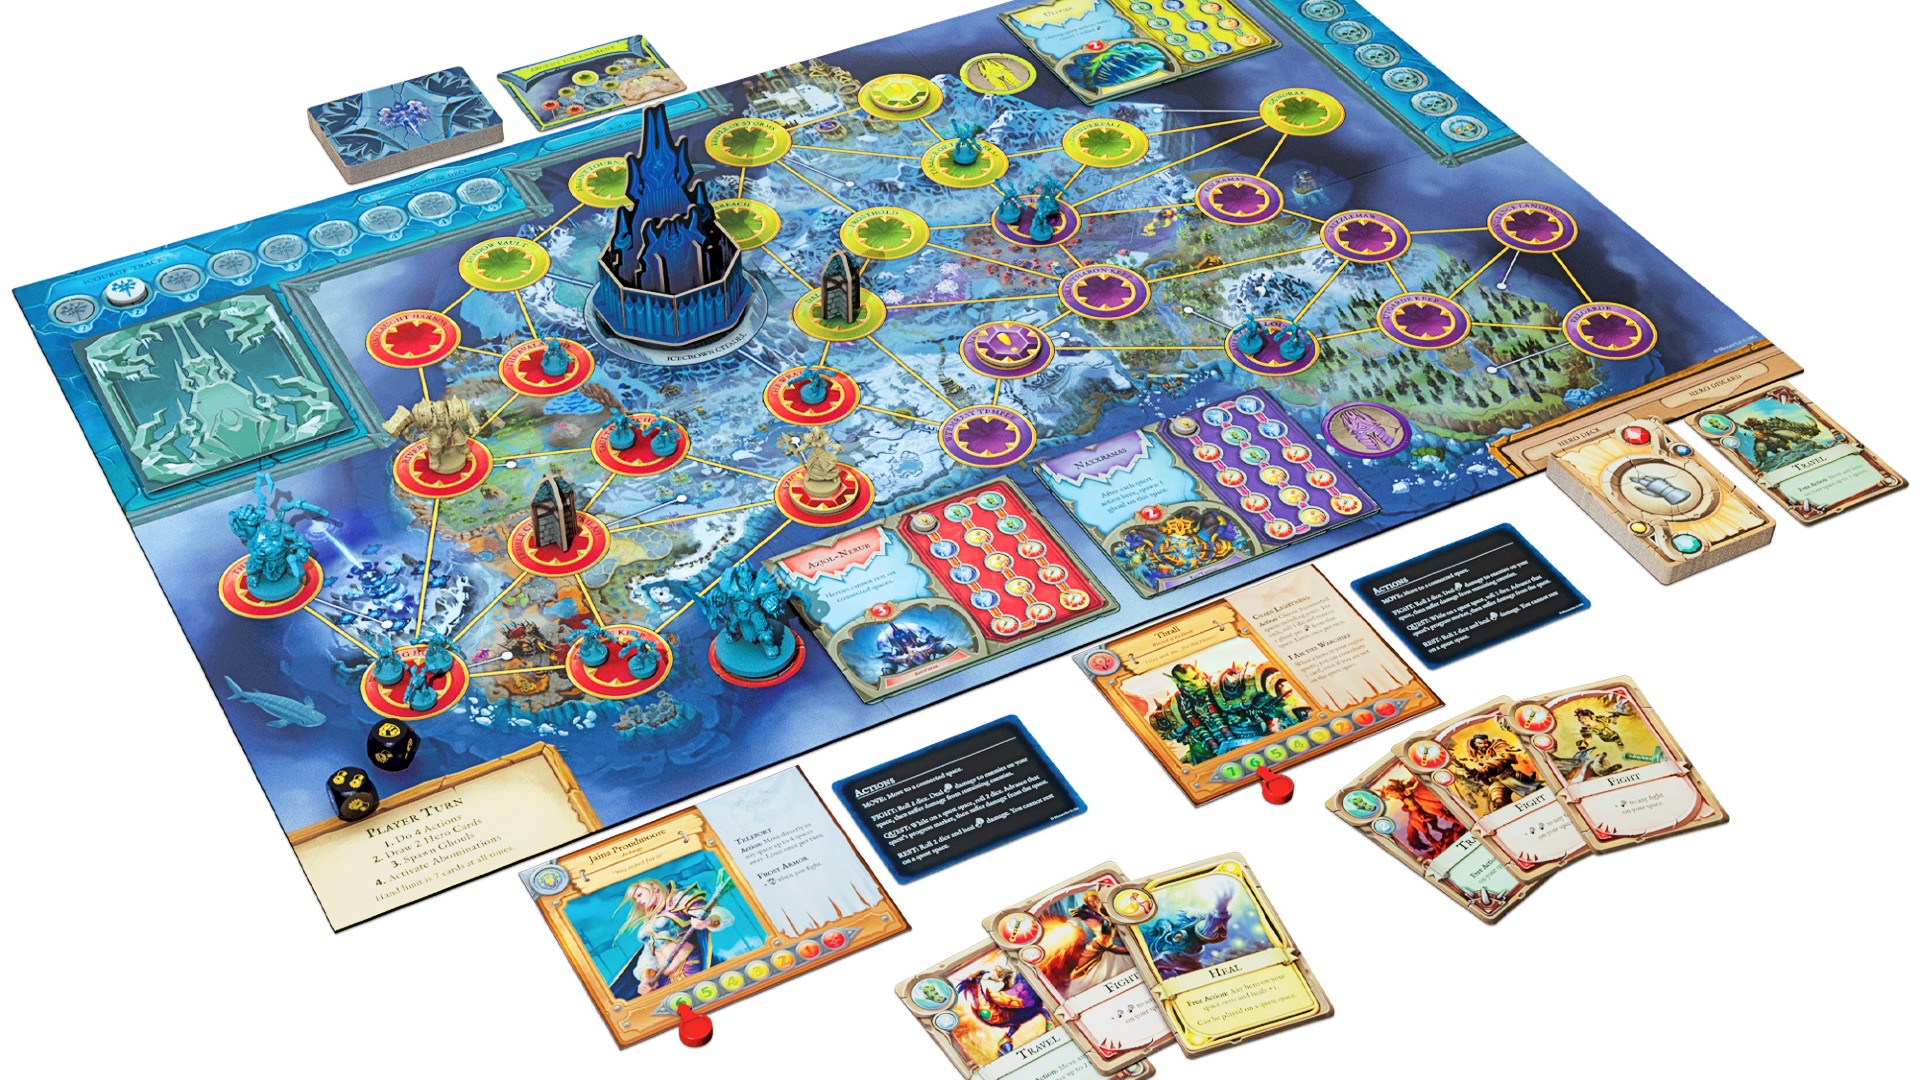 Here’s how WoW’s Pandemic board game works